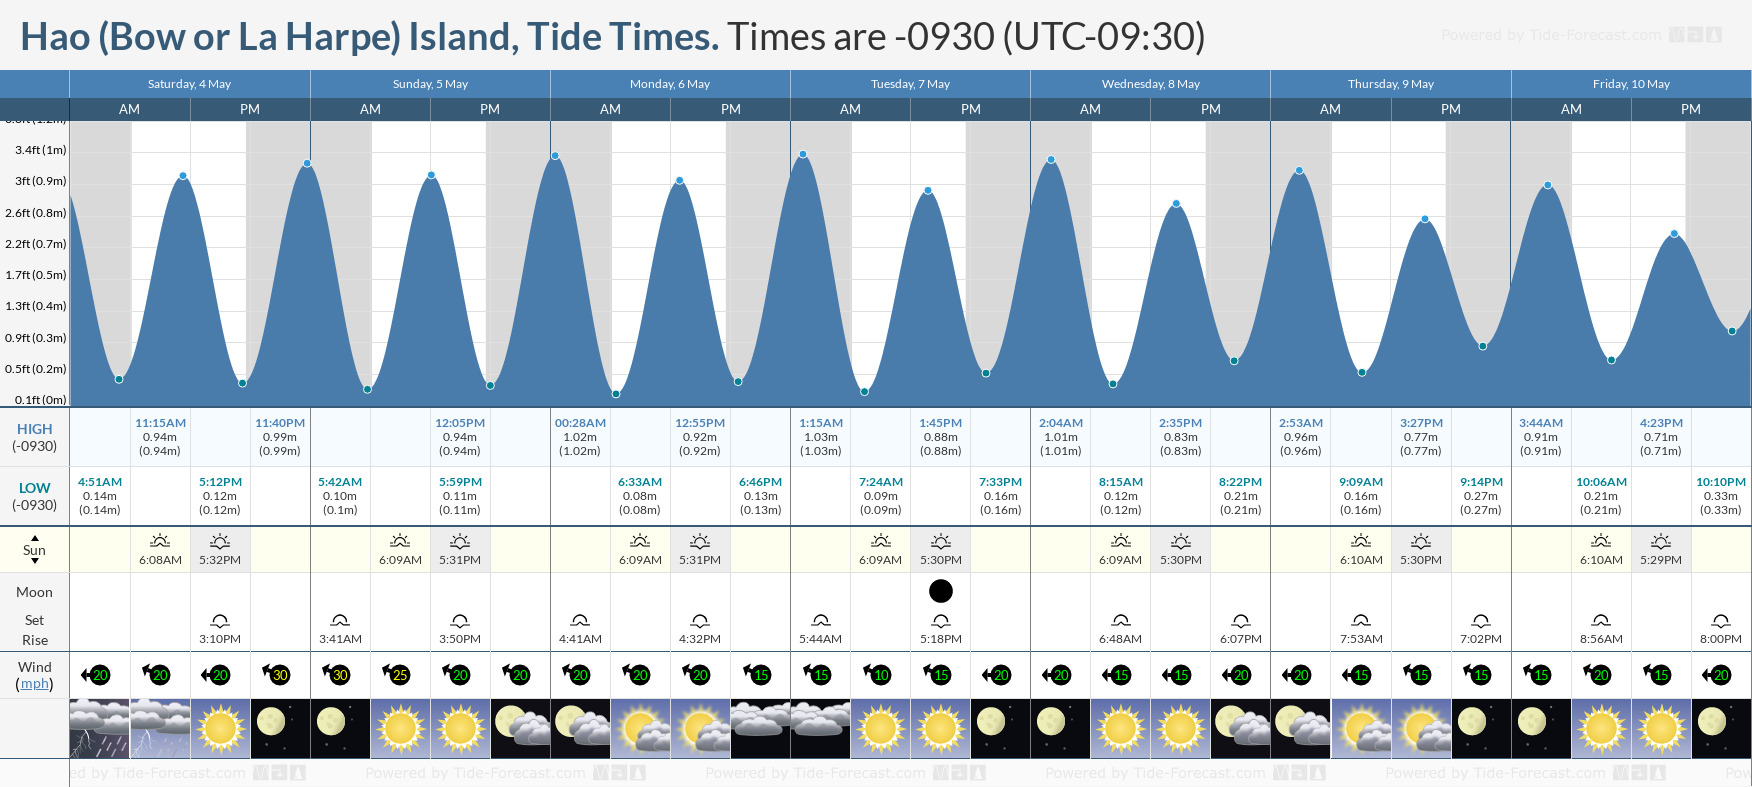 Hao (Bow or La Harpe) Island Tide Chart including high and low tide times for the next 7 days